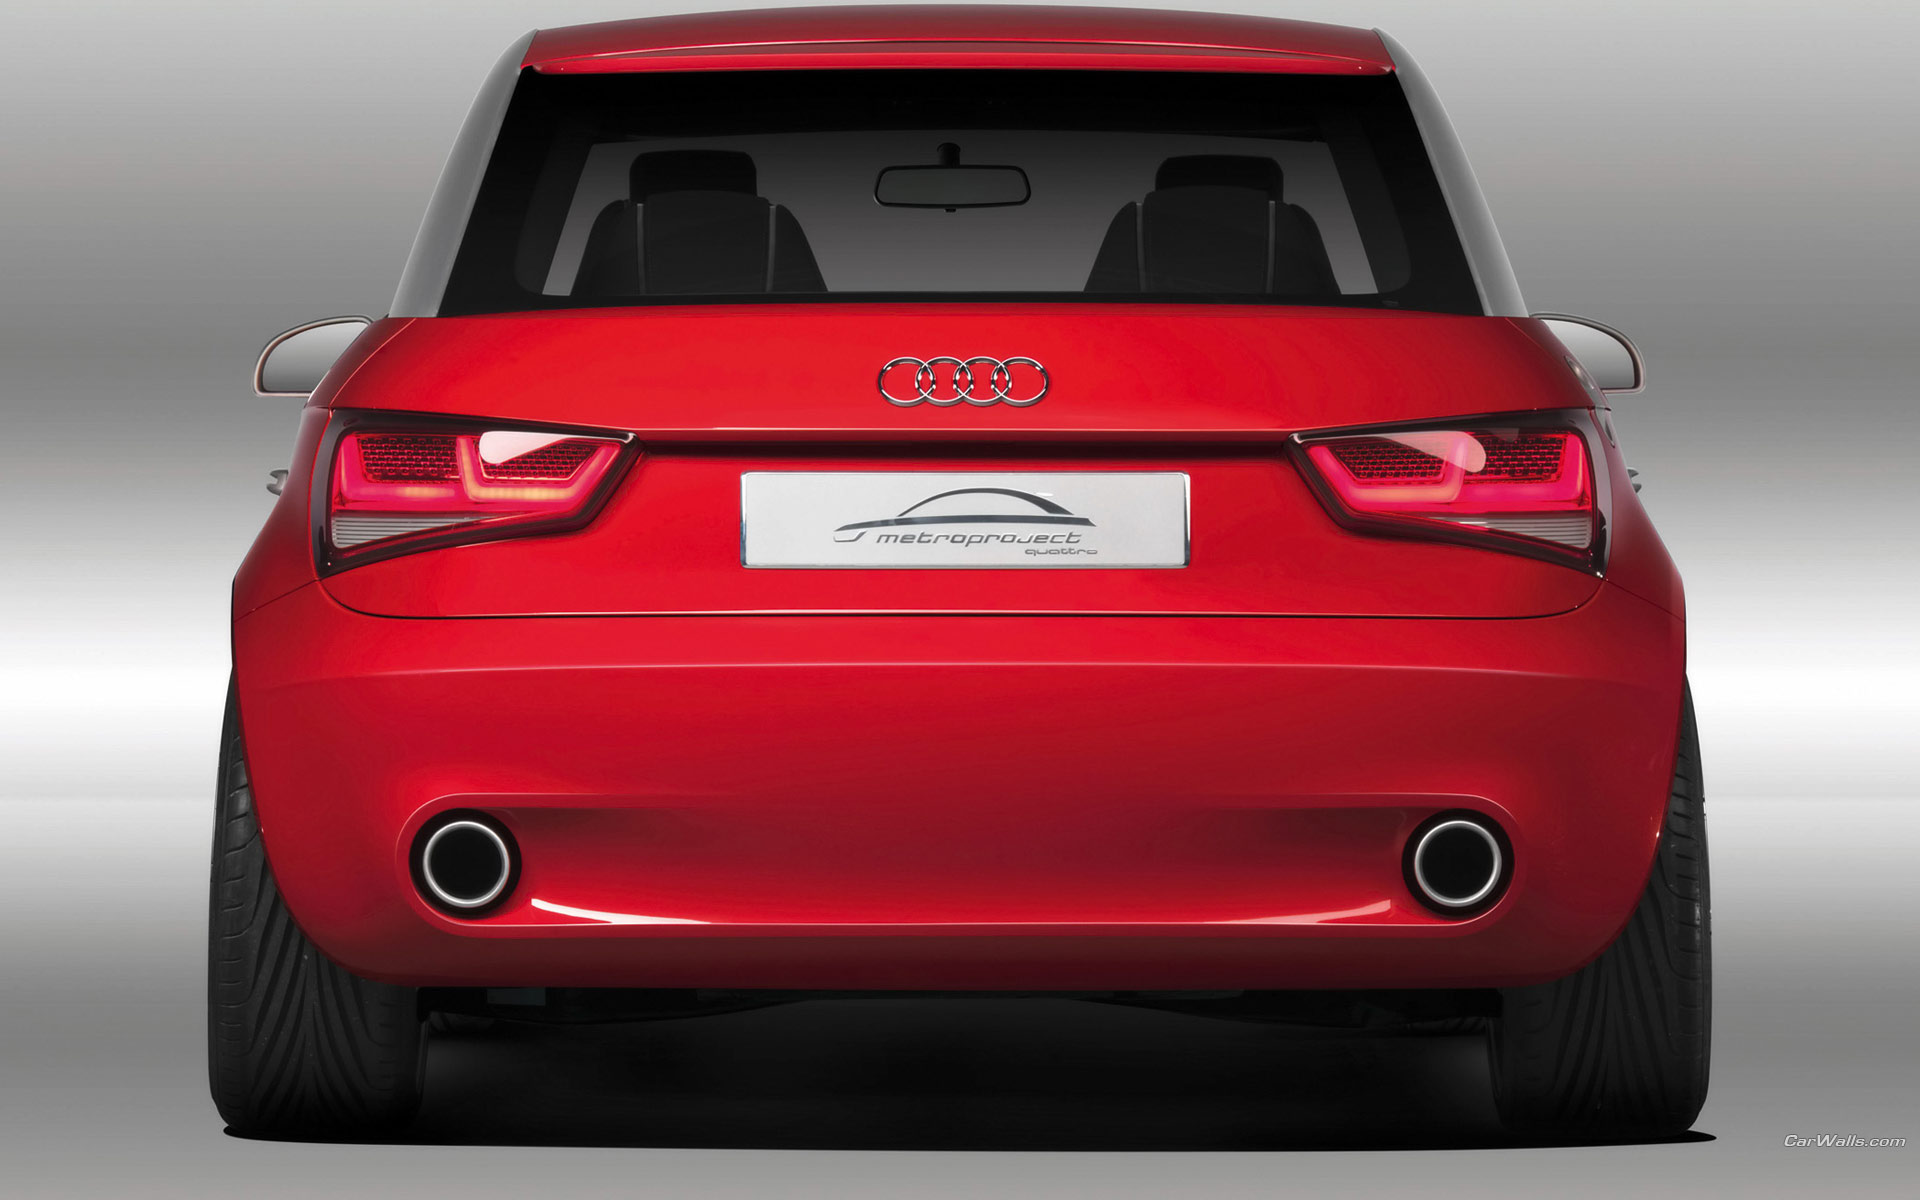 Download HQ red metroproject back Audi wallpaper / 1920x1200